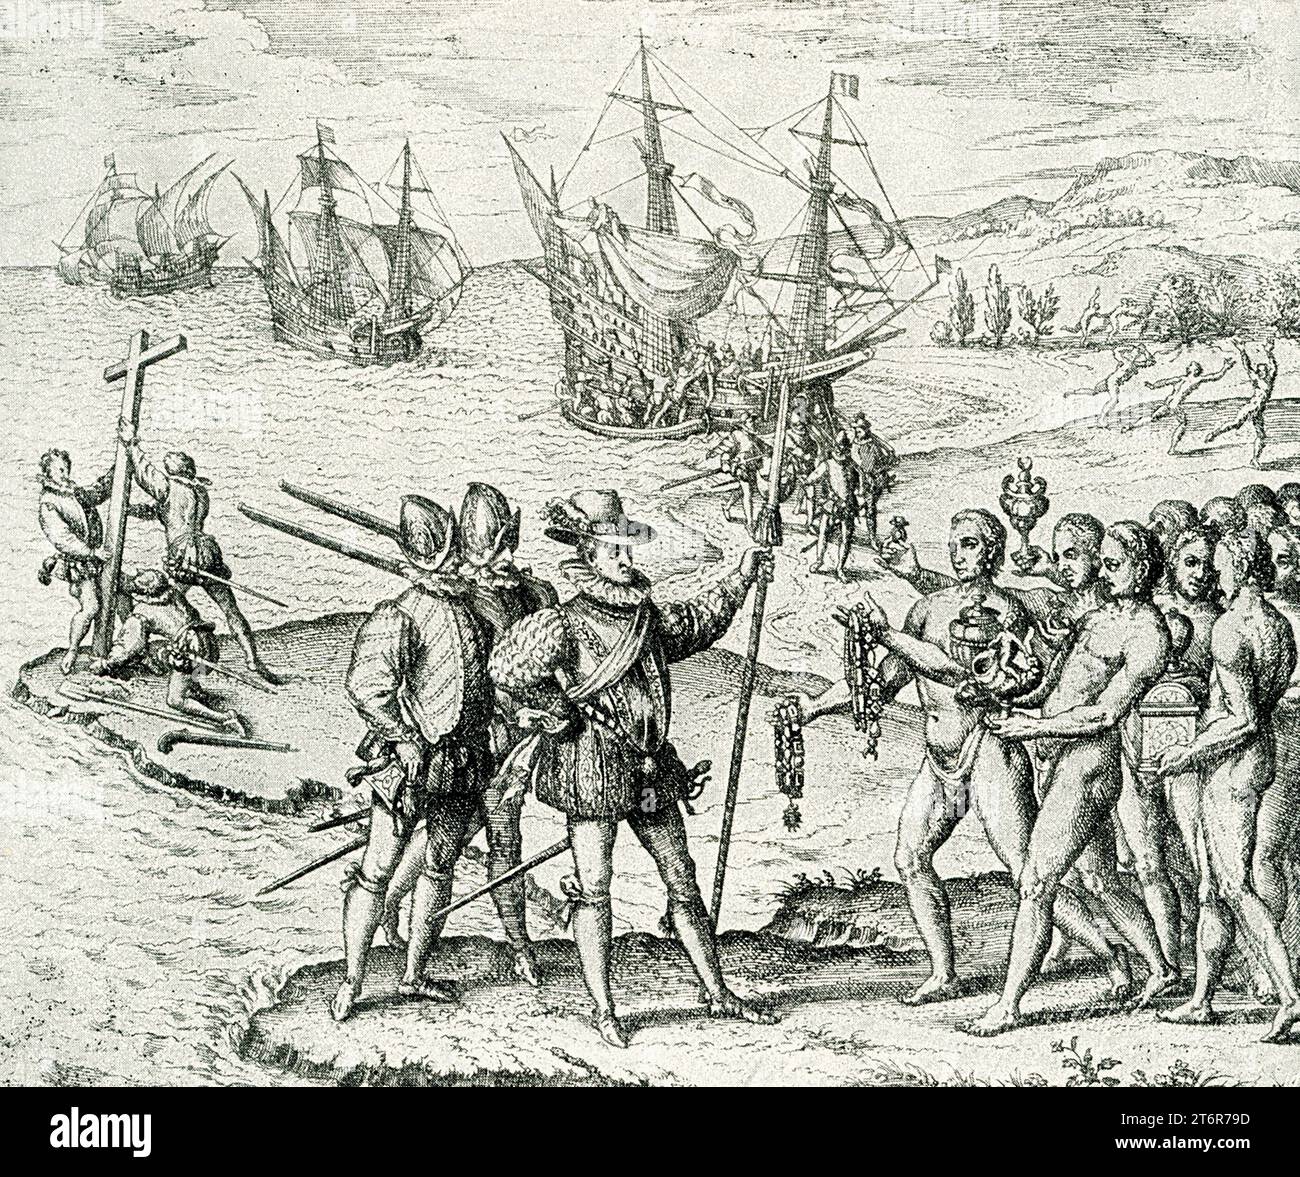 This illustraion of the landing of Columbus is taken from 'Americae Partes,' published in Frankfurt am Main in 1590. It shows Christopher Columbus and members of his crew on a beach in the West Indies, newly landed from his flagship Santa Maria on October 12, 1492. The island landing was the first landfall of their expedition to find a westward route from Europe to China, Japan and perhaps unknown lands. Stock Photo